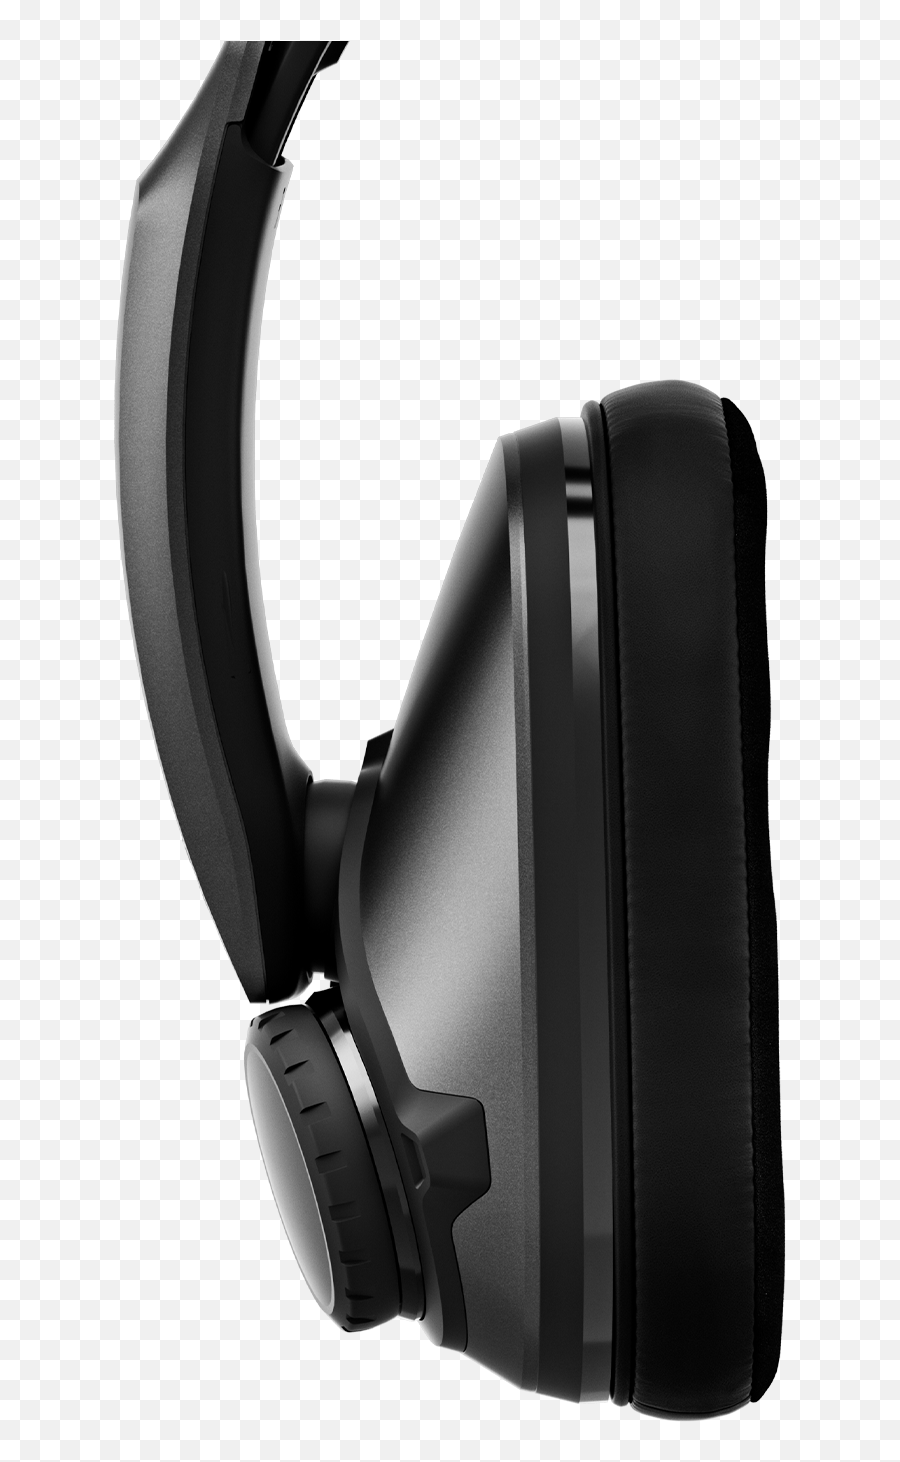 Gsp 370 From Epos A Single Charge 100 Hours Of Wireless - Gaming Headphones Front View Transparent Png,Skullcandy Icon 2